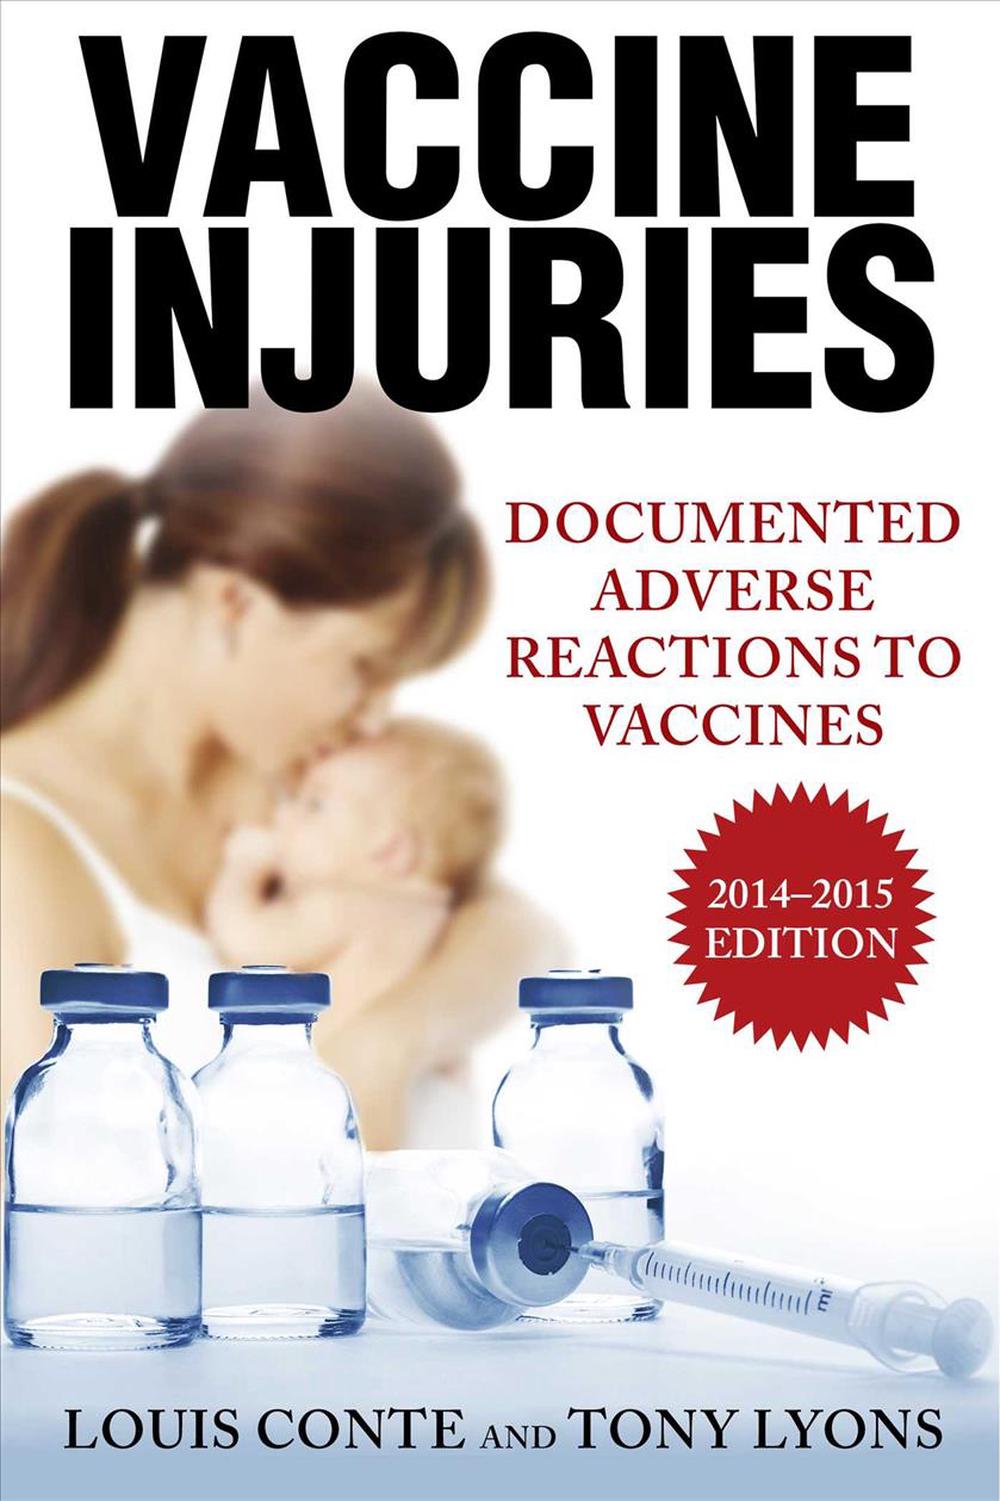 Vaccine Injuries Documented Adverse Reactions to Vaccines by Lou Conte